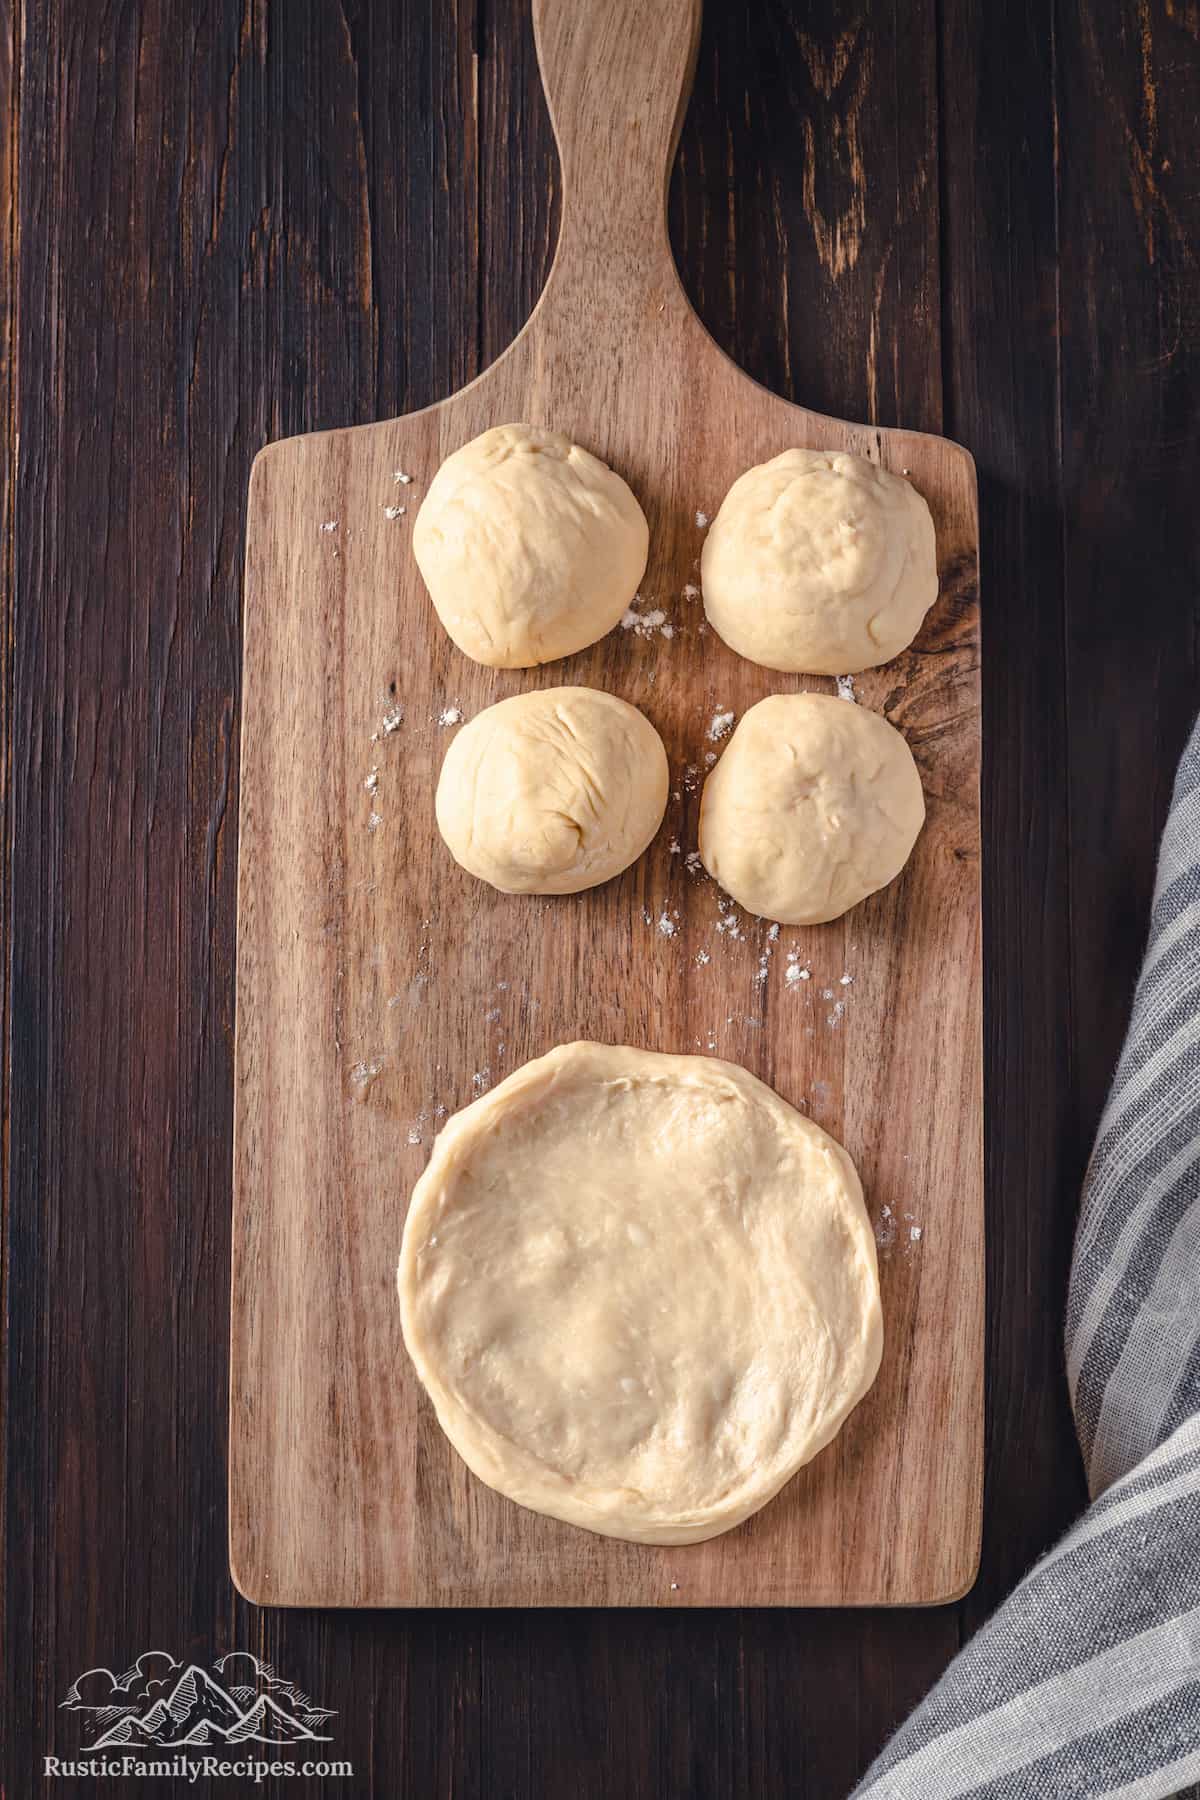 Top view of a flattened round of dough on a wooden cutting board, next to four balls of dough.